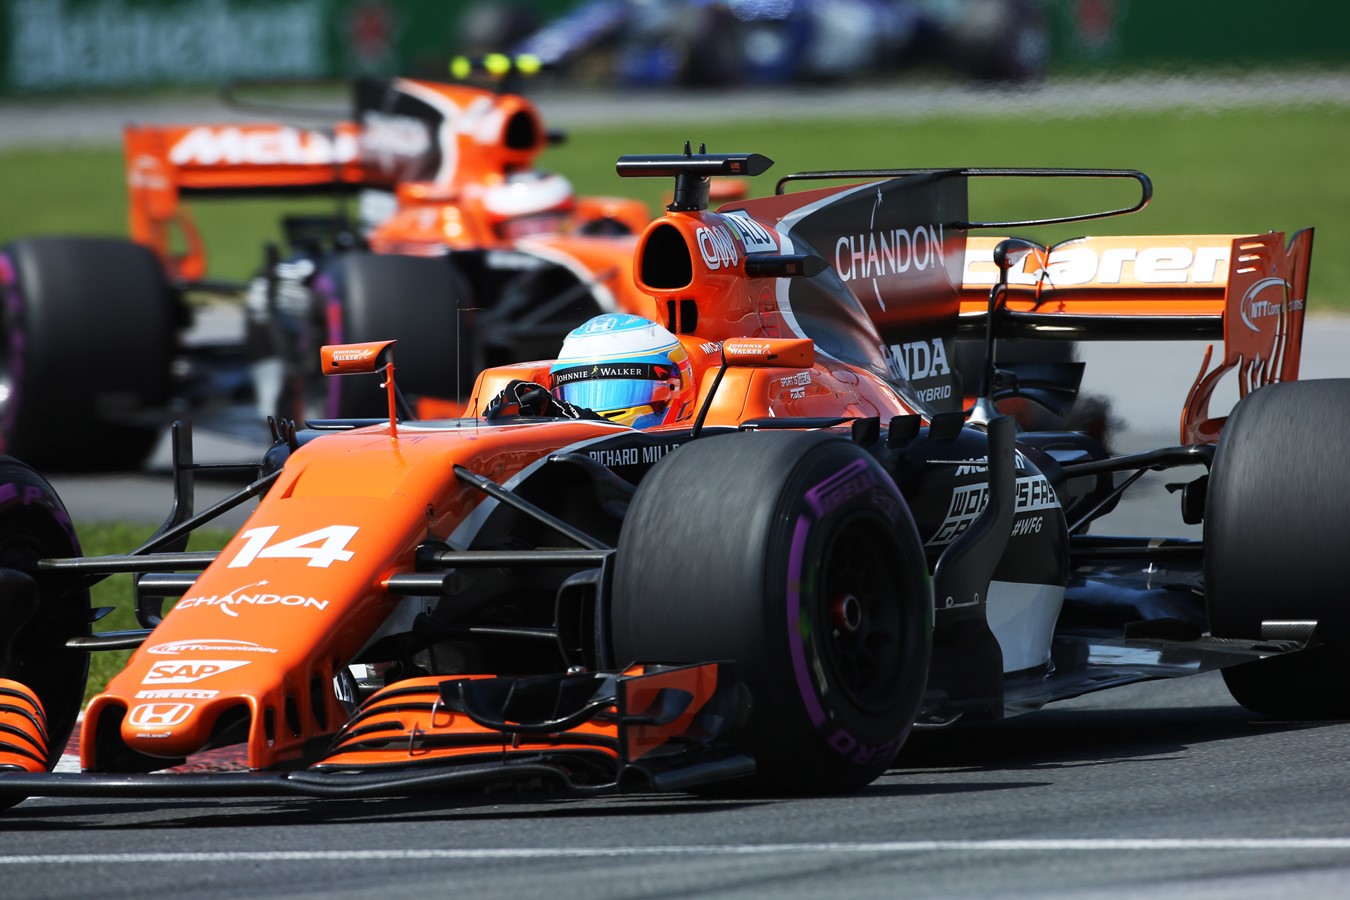 Difficult day for McLaren-Honda at the Canadian GP